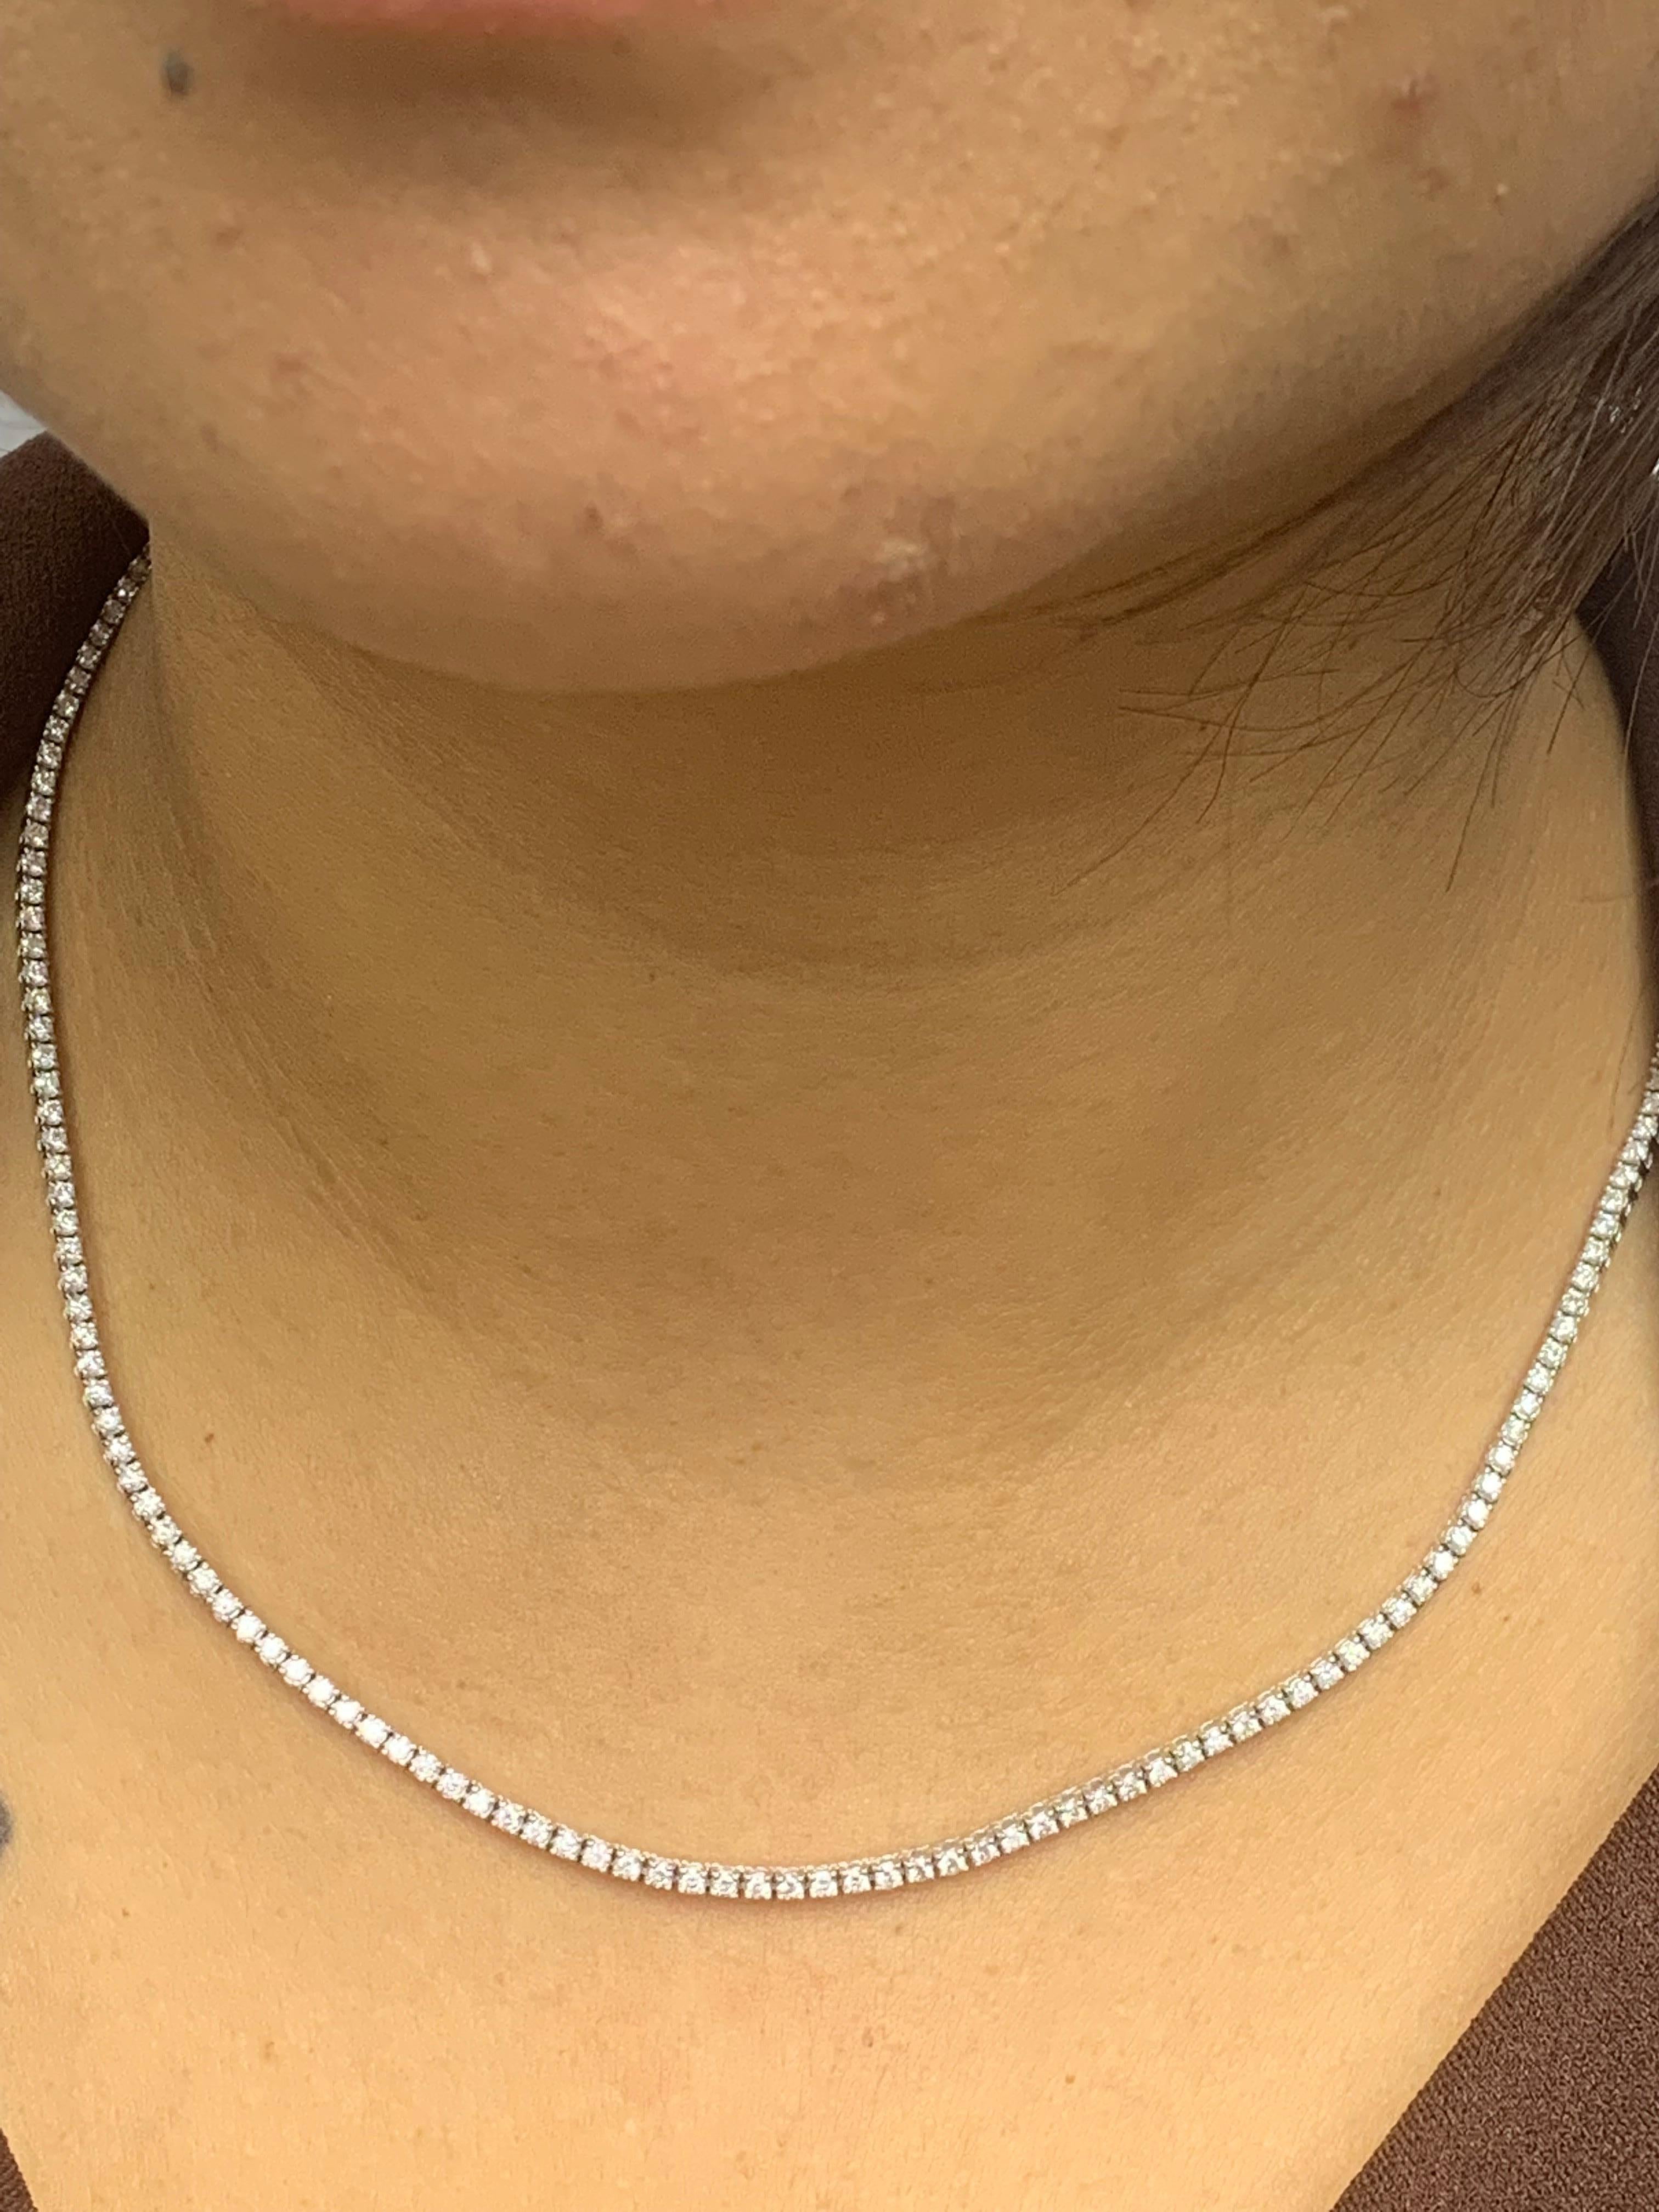 3.01 Carat Diamond Tennis Necklace in 14K White Gold For Sale 1